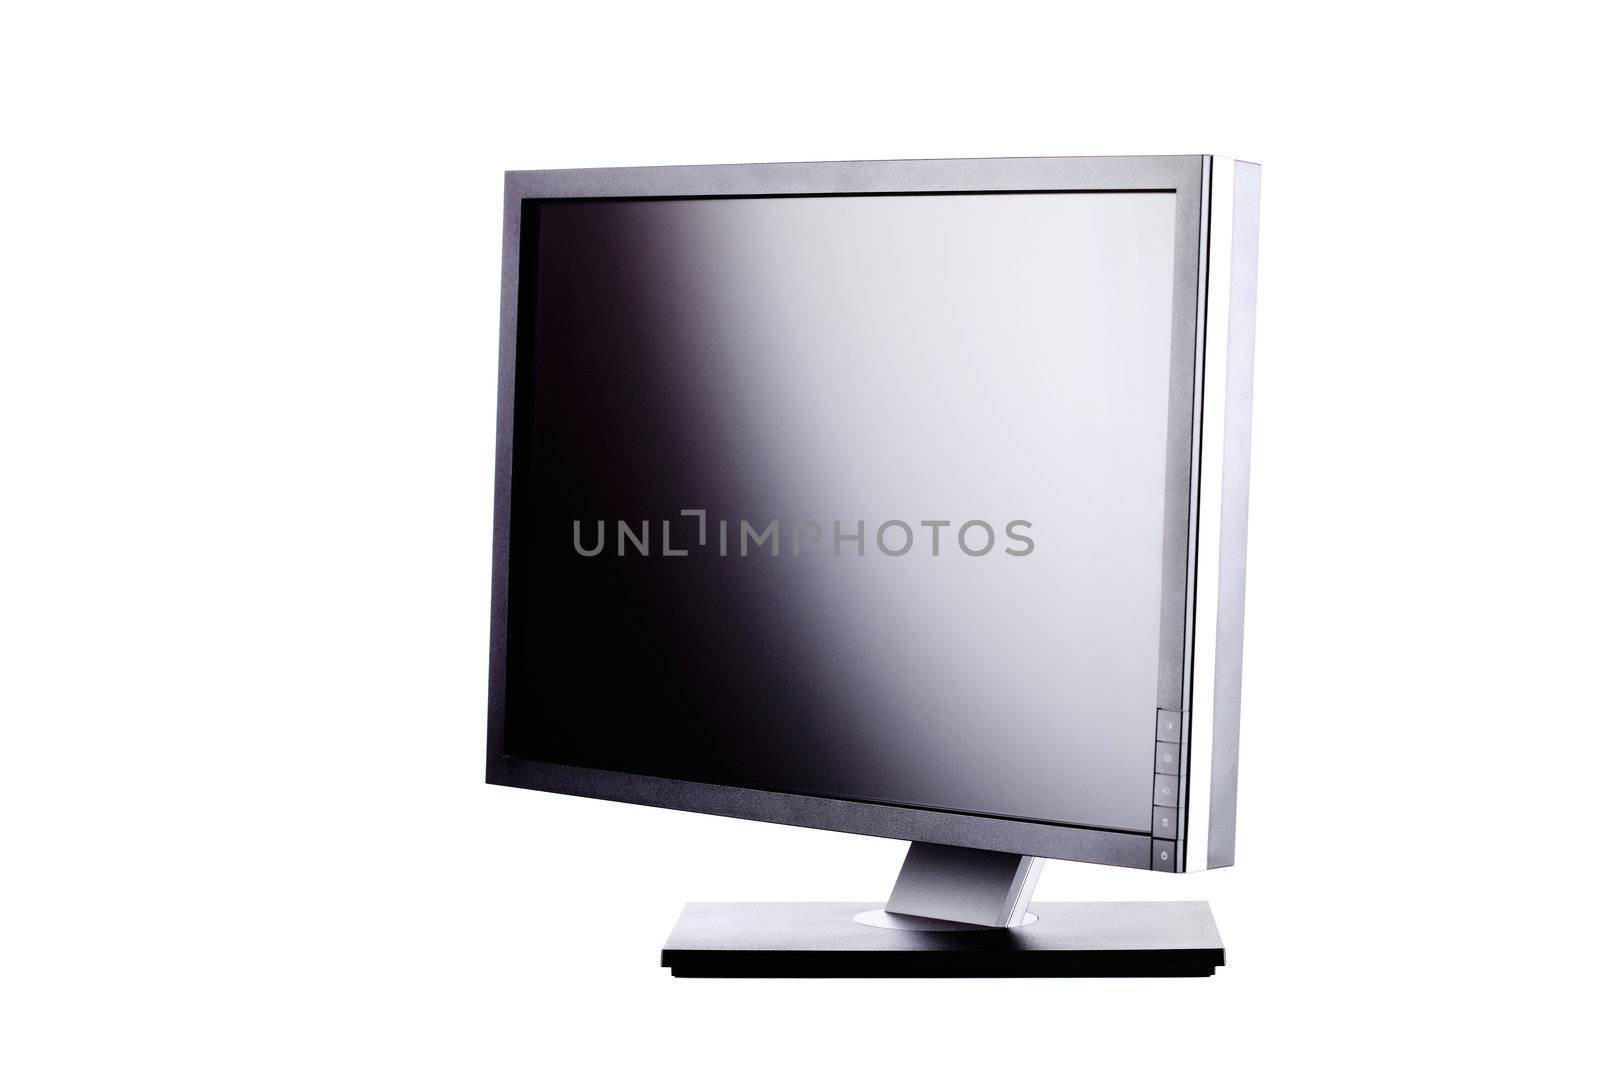 professional ips panel lcd monitor, isolated on white